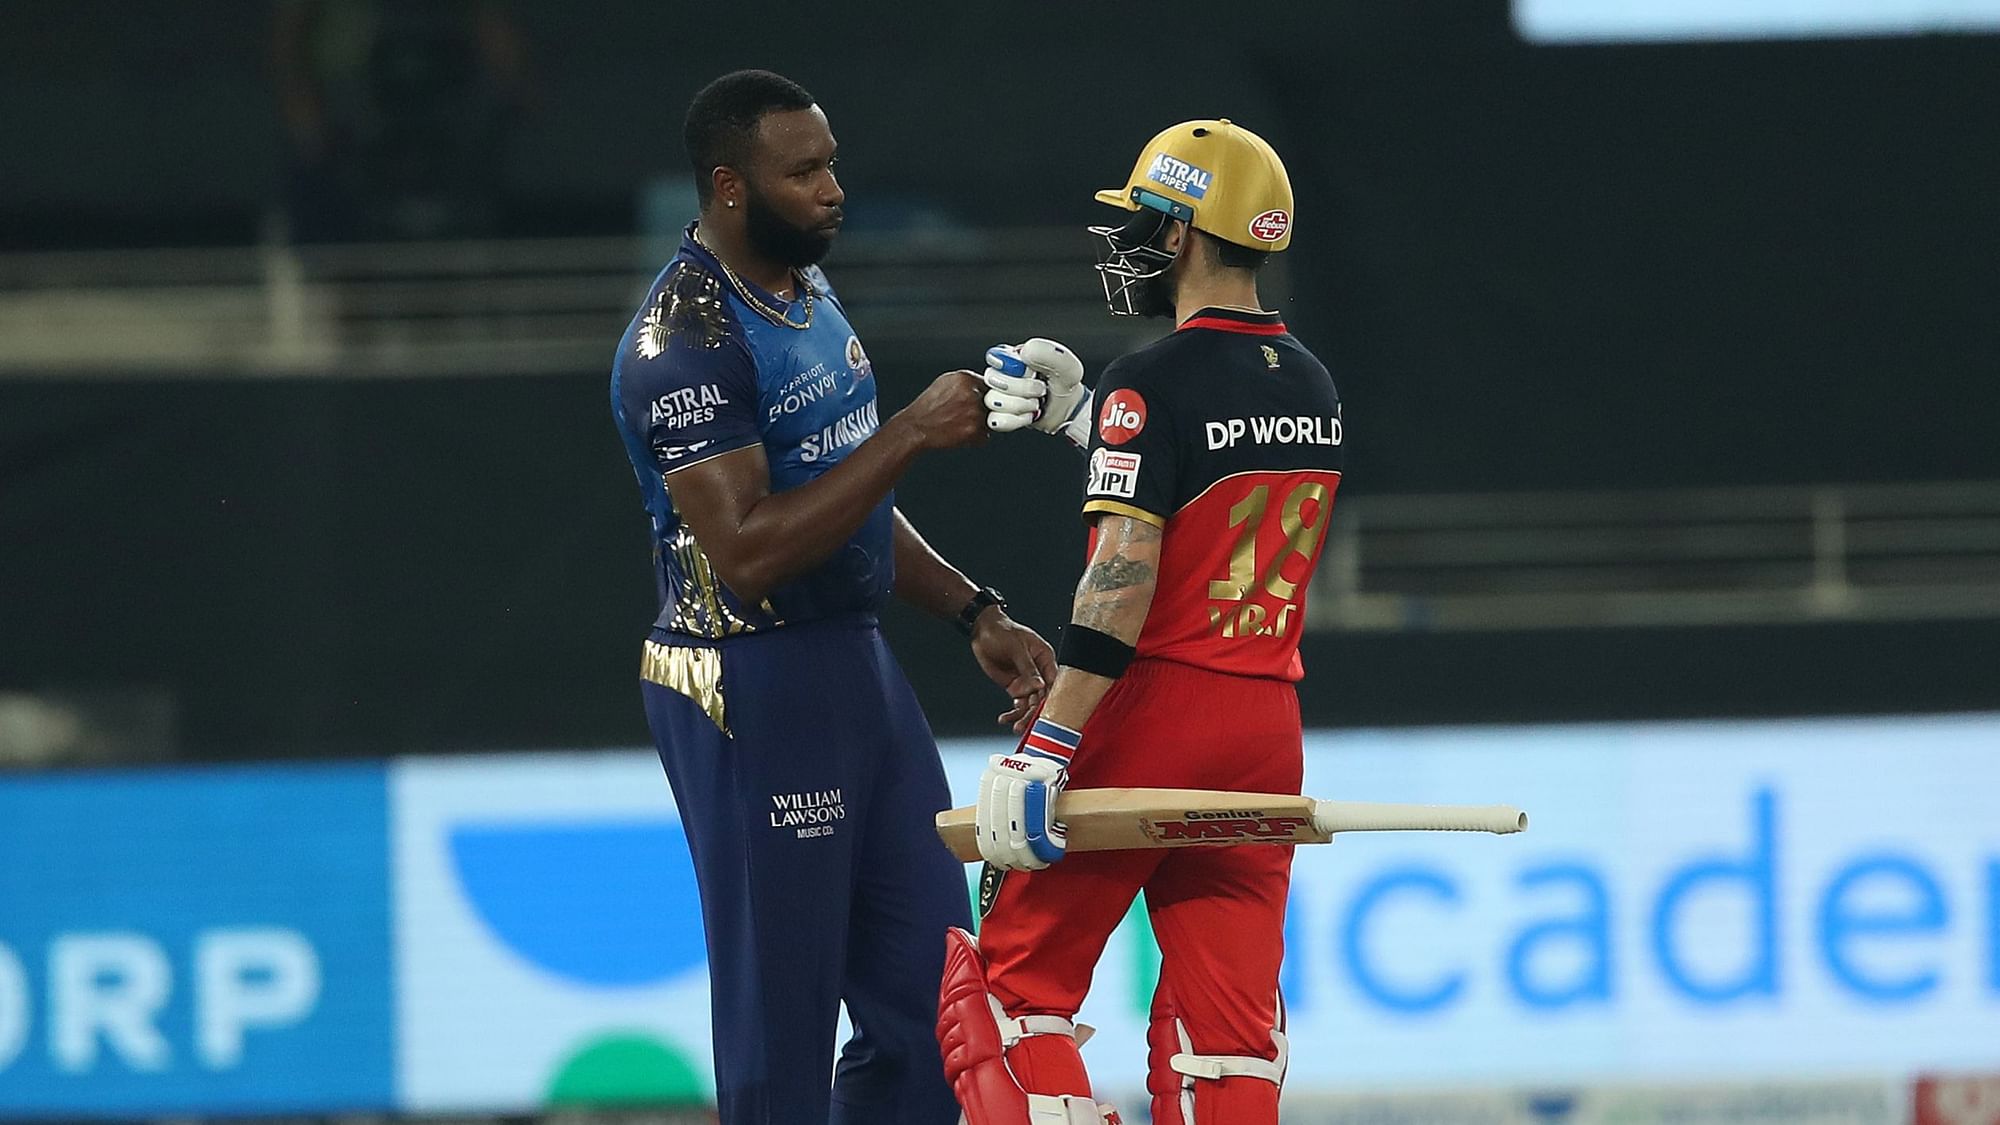 The last time these two teams met, the match was tied and Royal Challengers Bangalore defeated Mumbai Indians in the Super Over.